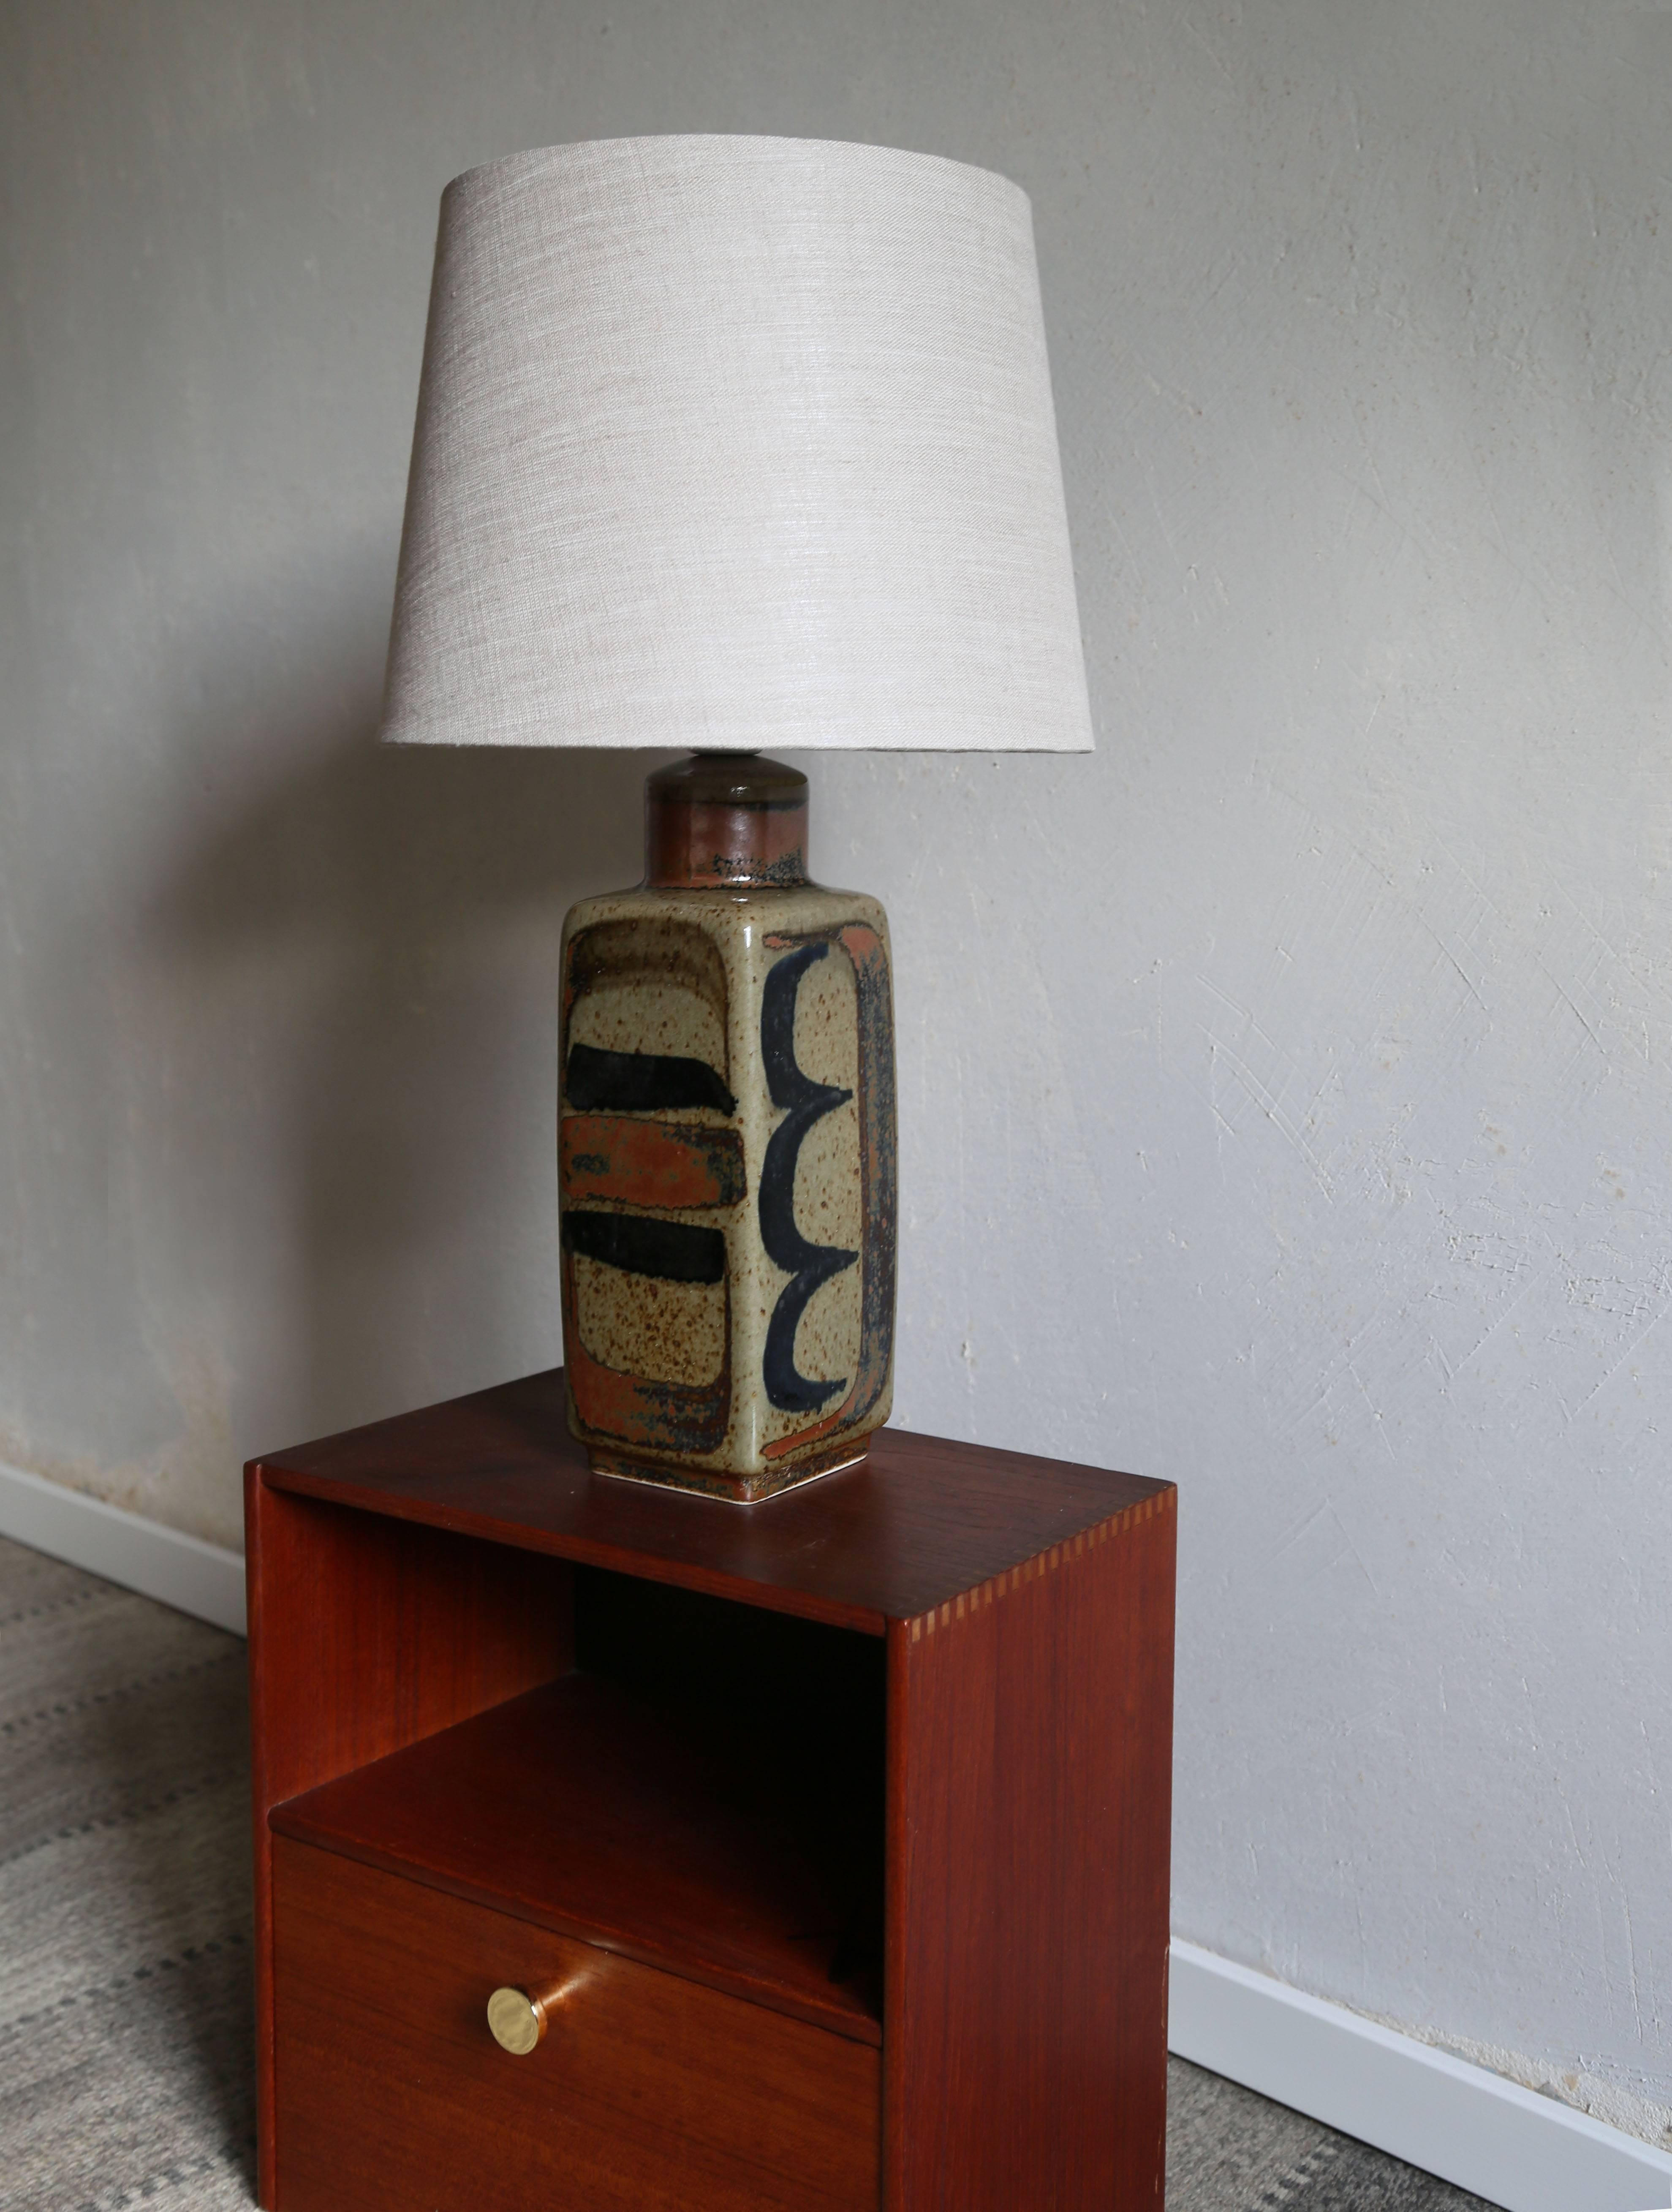 Carl Harry Stalhane hand-painted table lamp, signed

Rörstrand Ab, Sweden, early 1960s. 

Glazed and hand painted stoneware.

Measures: Height 39 cm (base only), width 12 cm (base only). 
Height 57.5 cm (total), diameter 38 cm